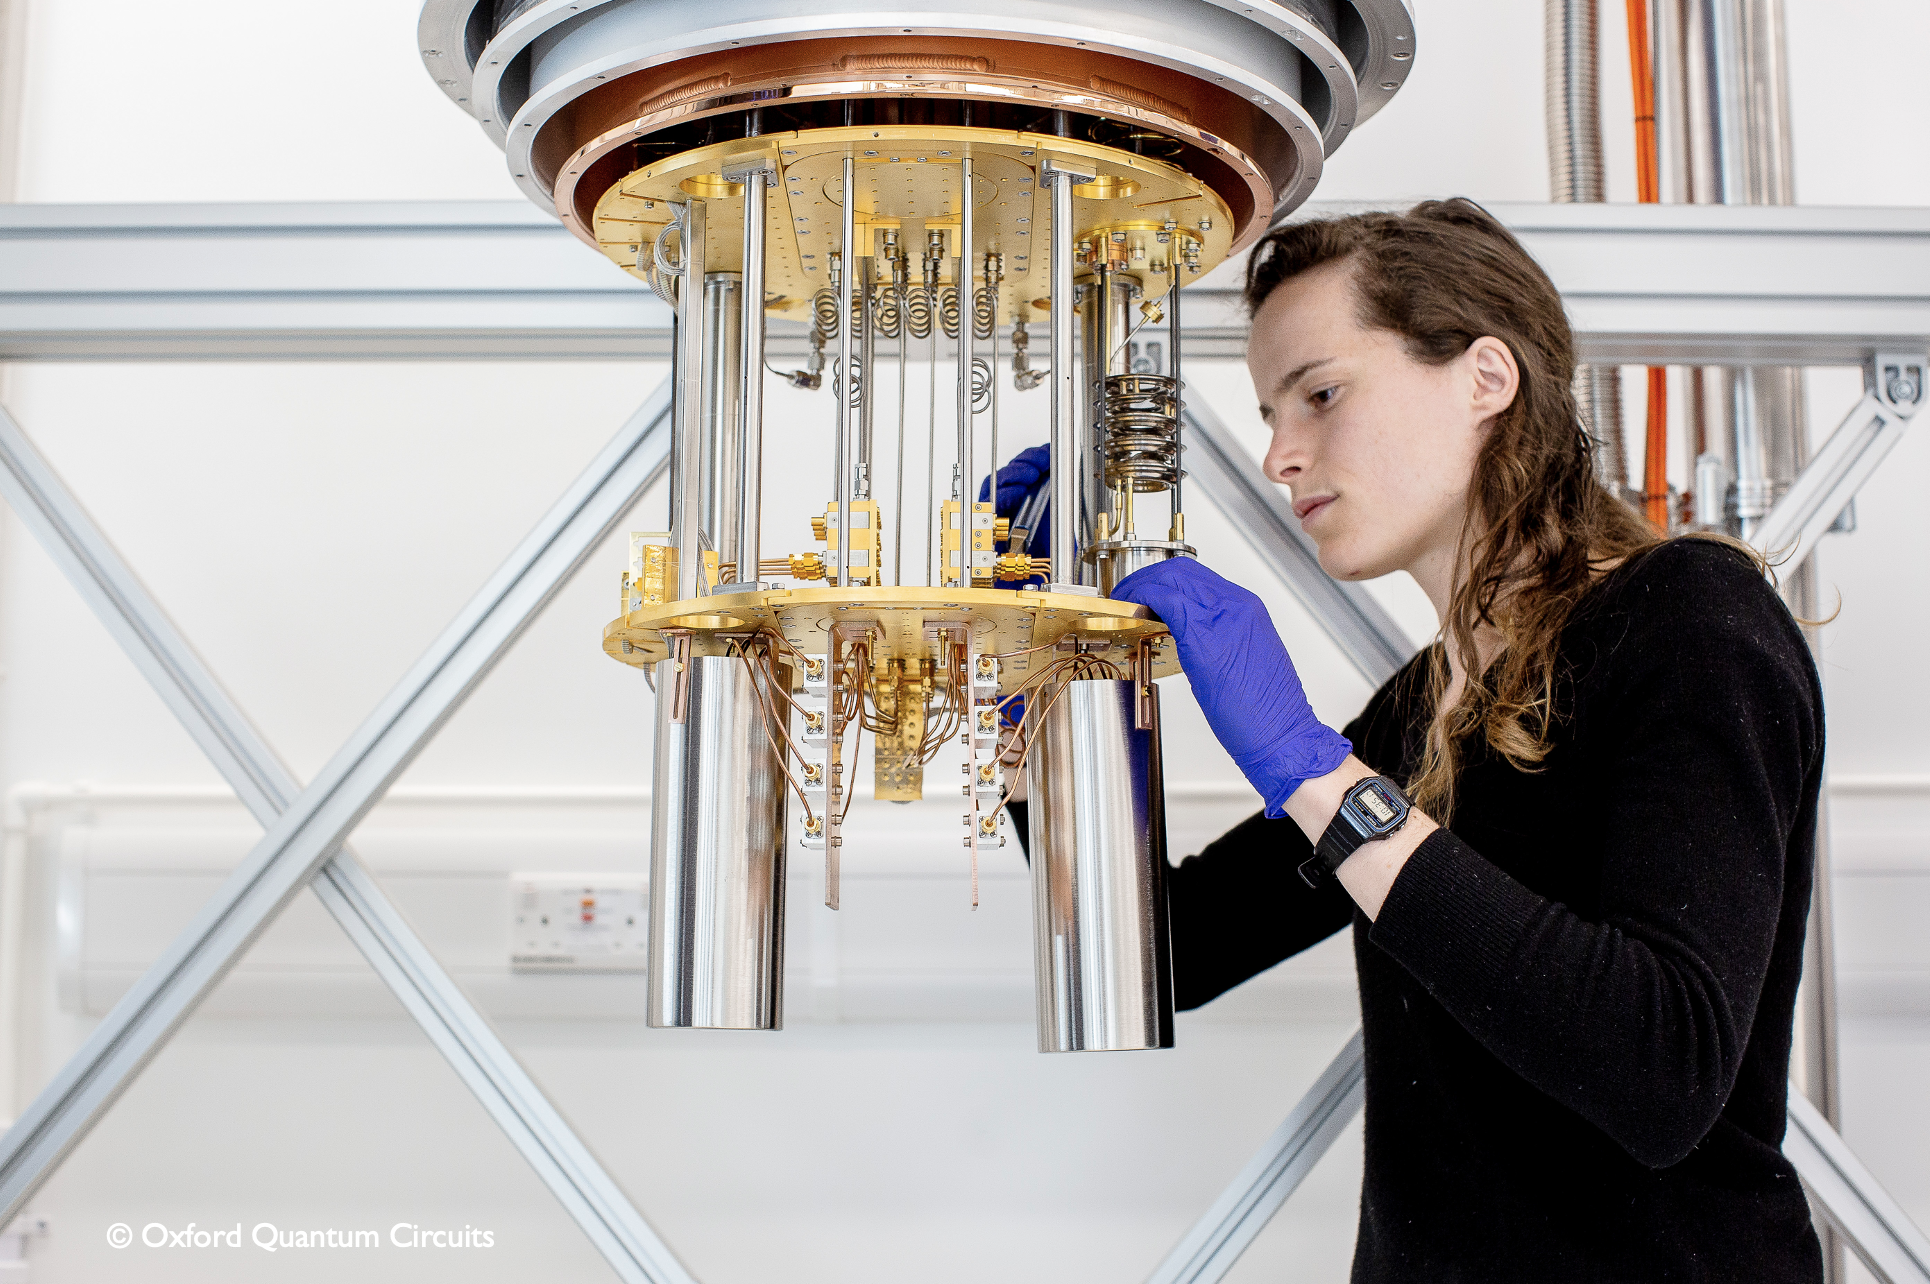 The UK plans to invest £2.5 billion in quantum computing over the next 10 years